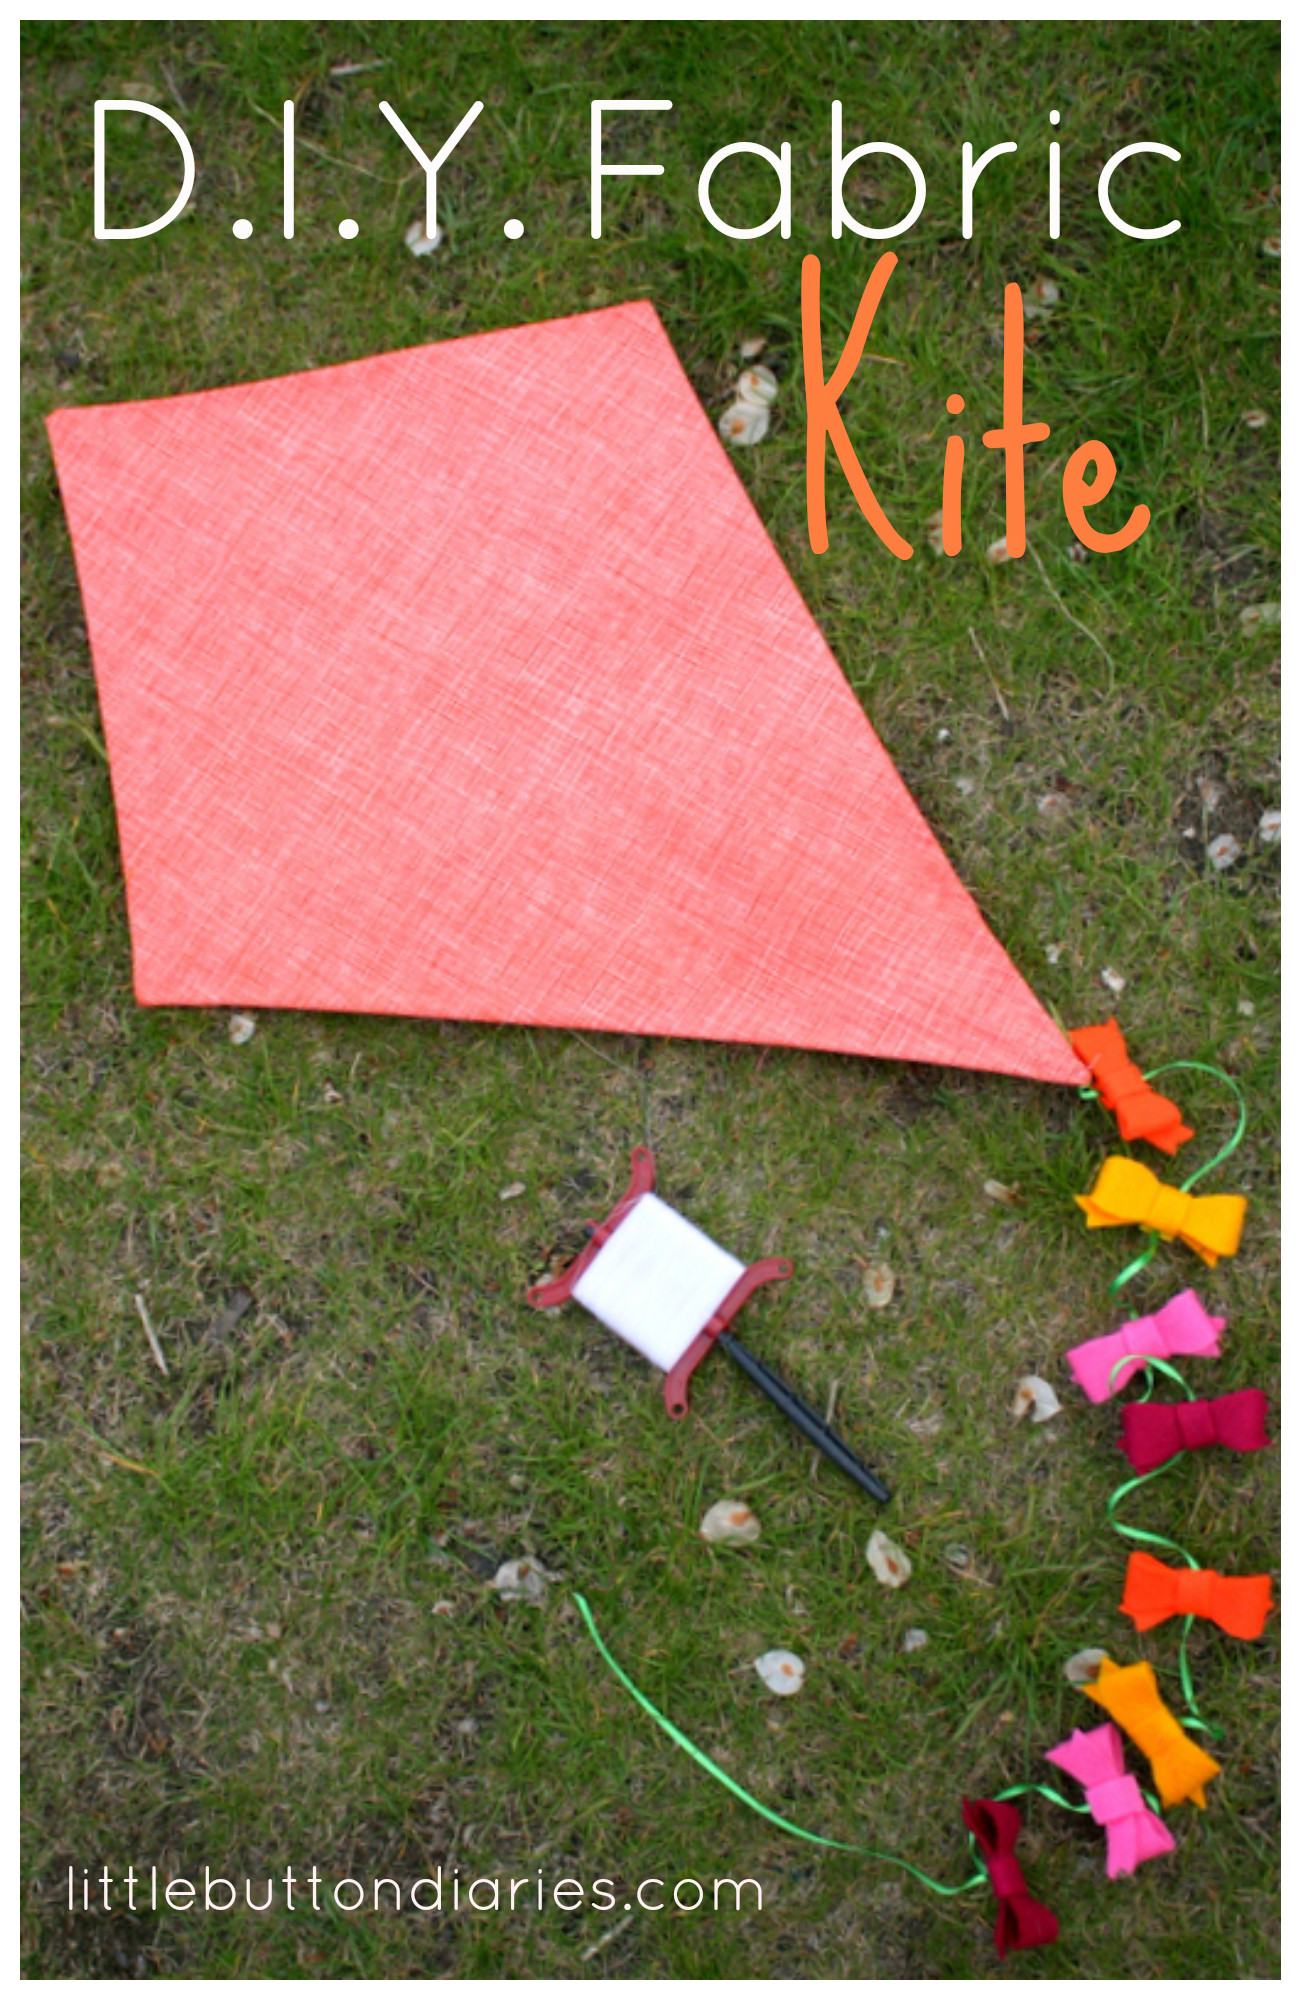 DIY Kite For Kids
 Nap Time Crafts Fabric Kite for Kids Little Button Diaries